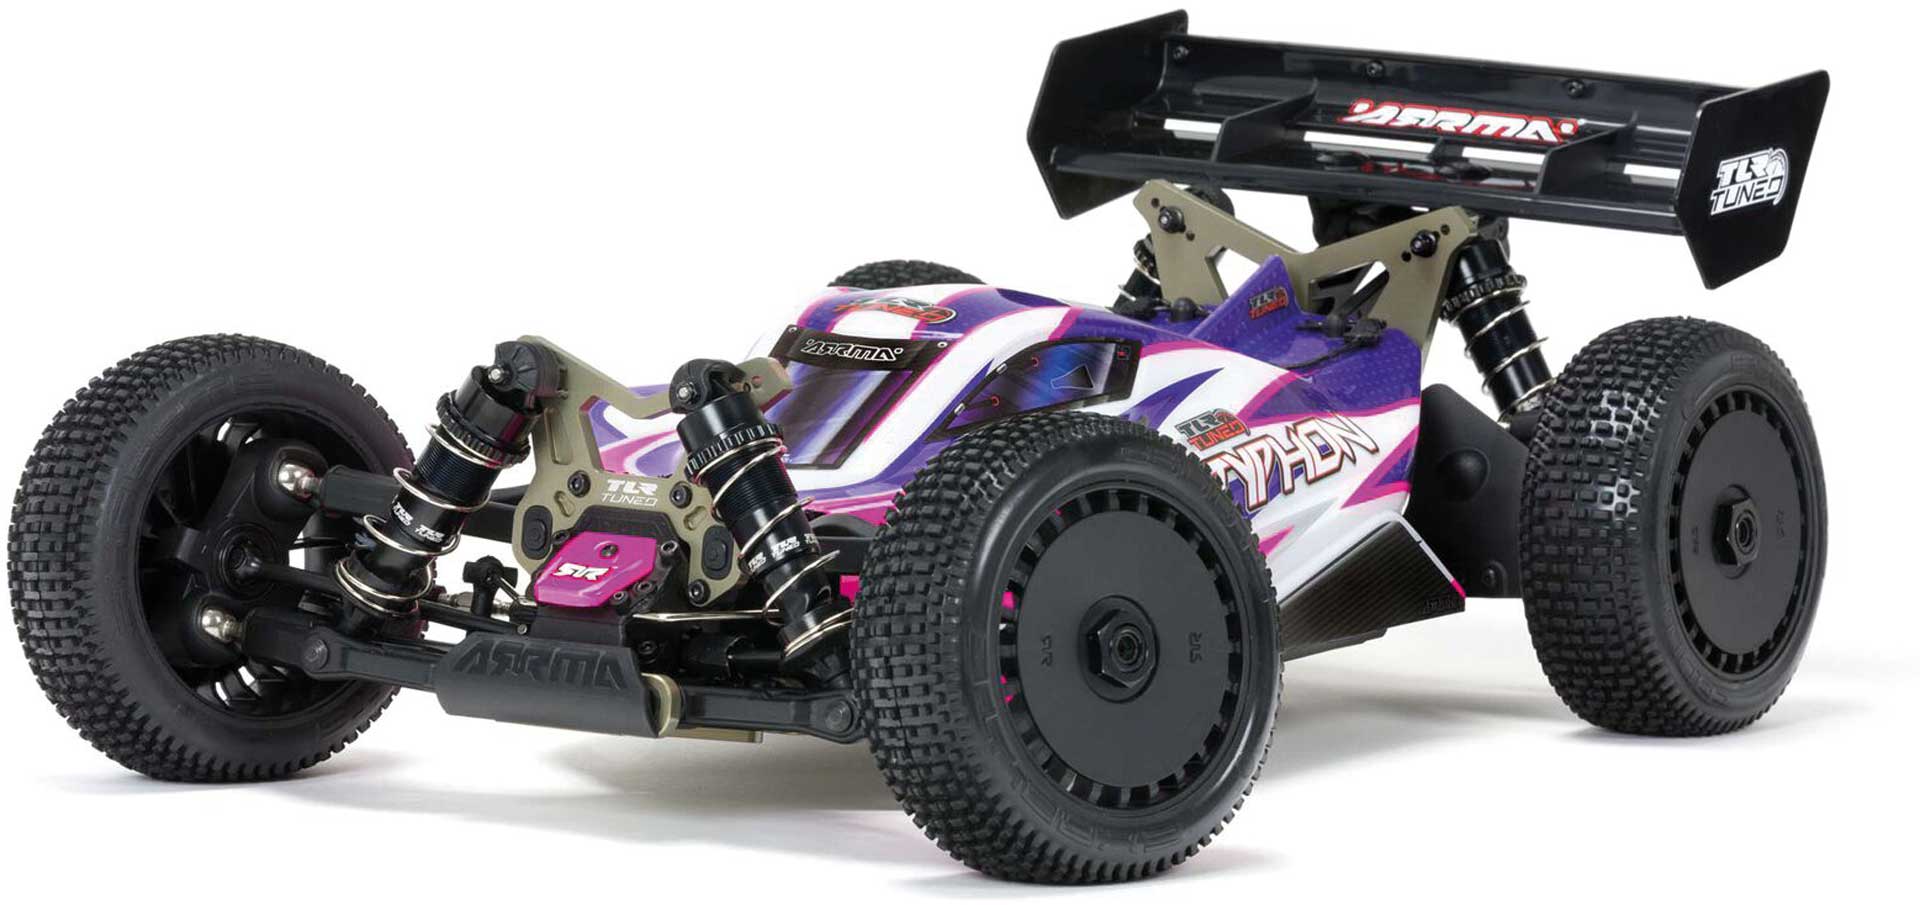 ARRMA 1/8 TLR Tuned TYPHON 4X4 Roller Buggy, Rose/pourpre